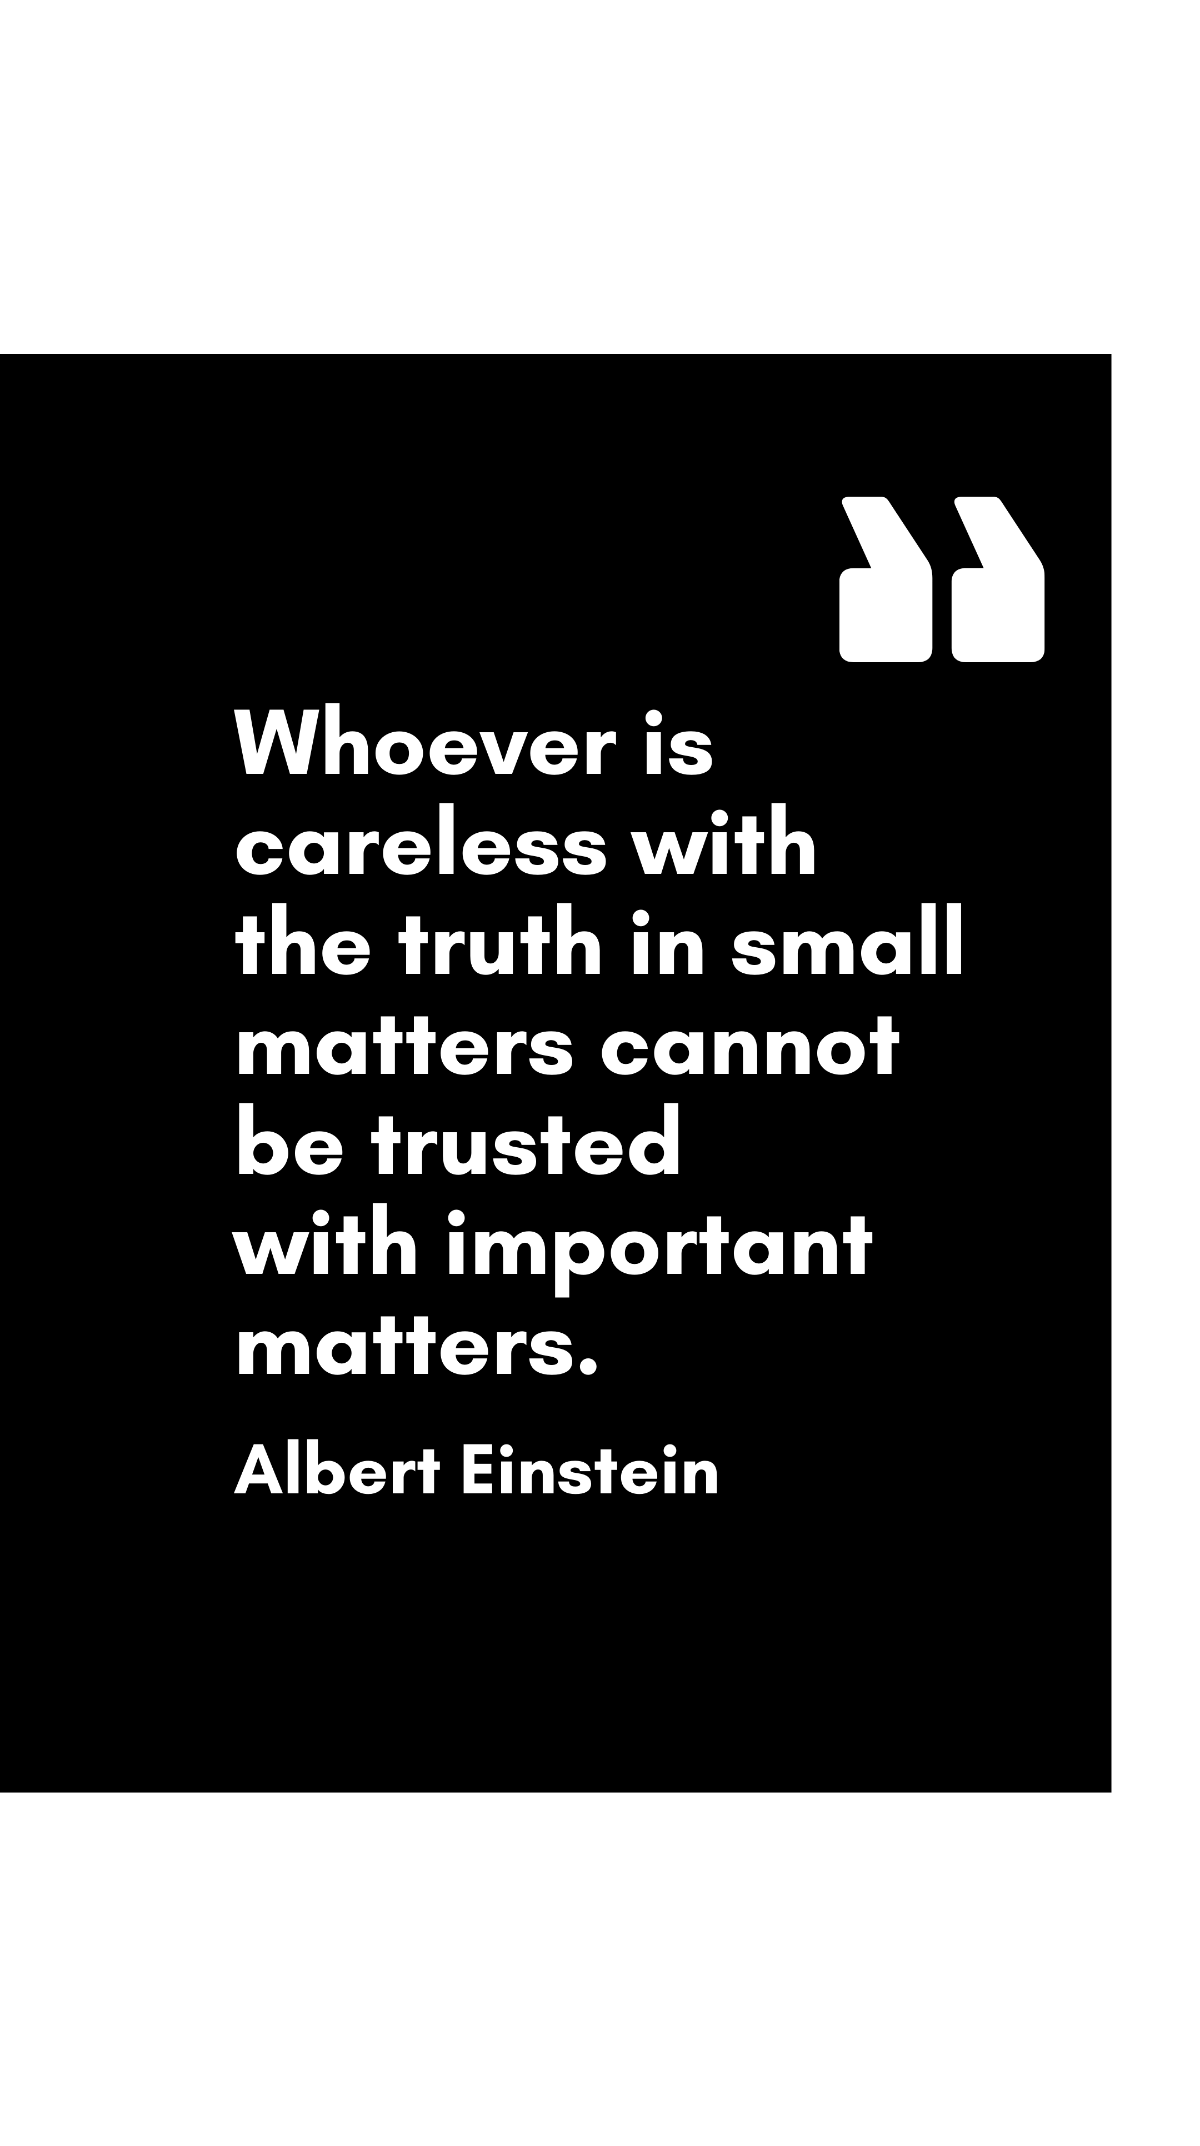 Free Albert Einstein - Whoever is careless with the truth in small matters cannot be trusted with important matters. Template